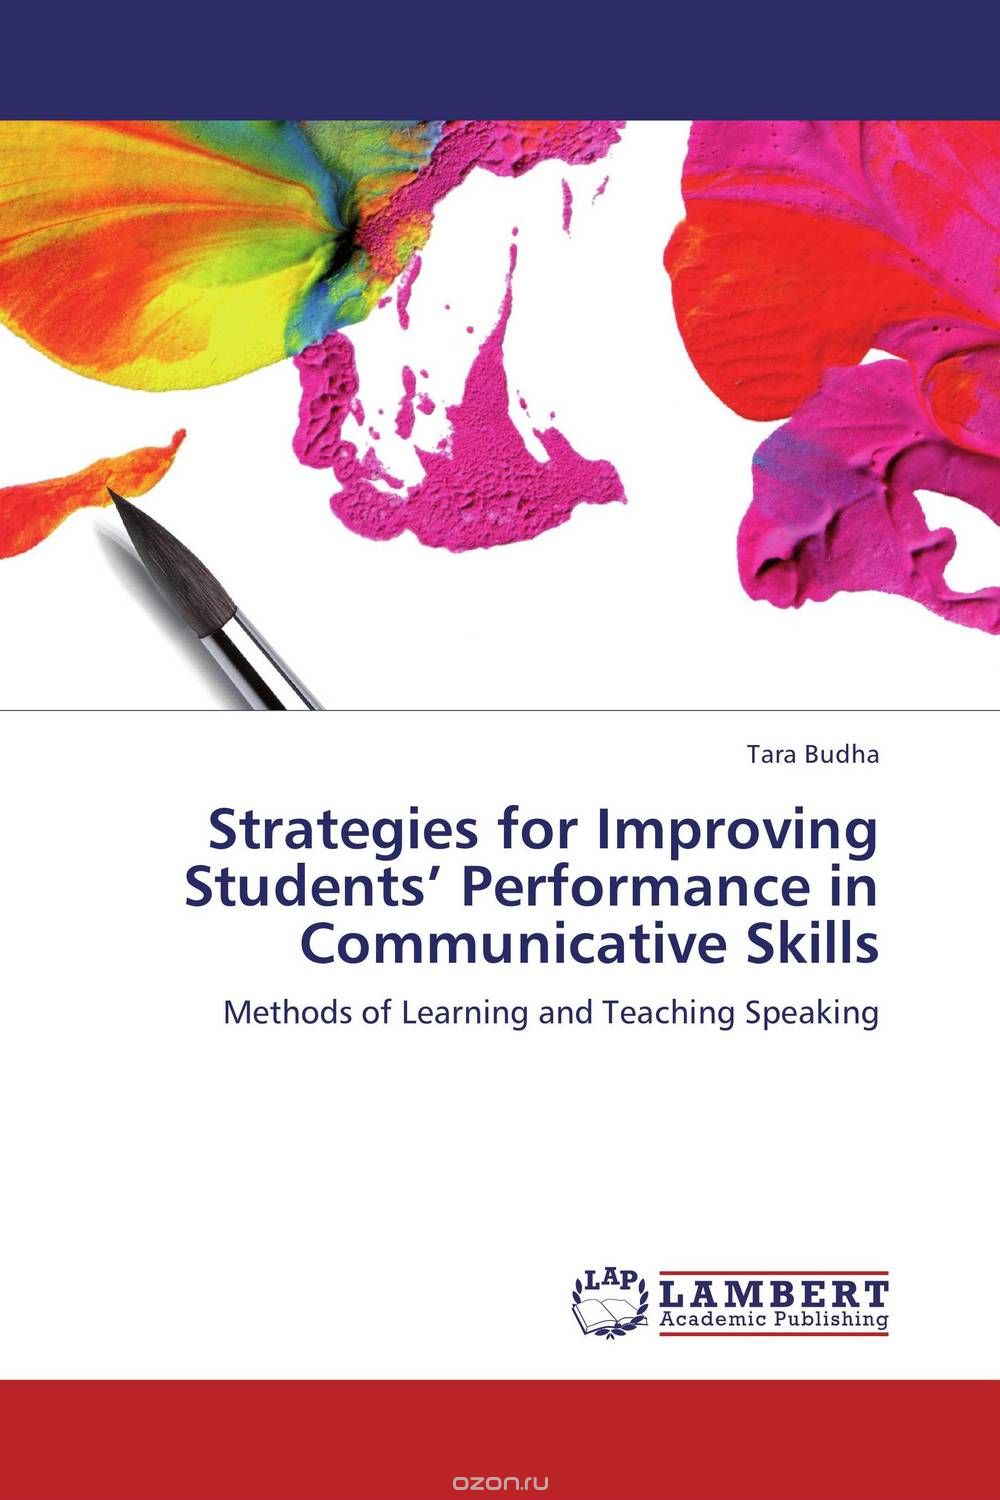 Strategies for Improving Students’ Performance in Communicative Skills